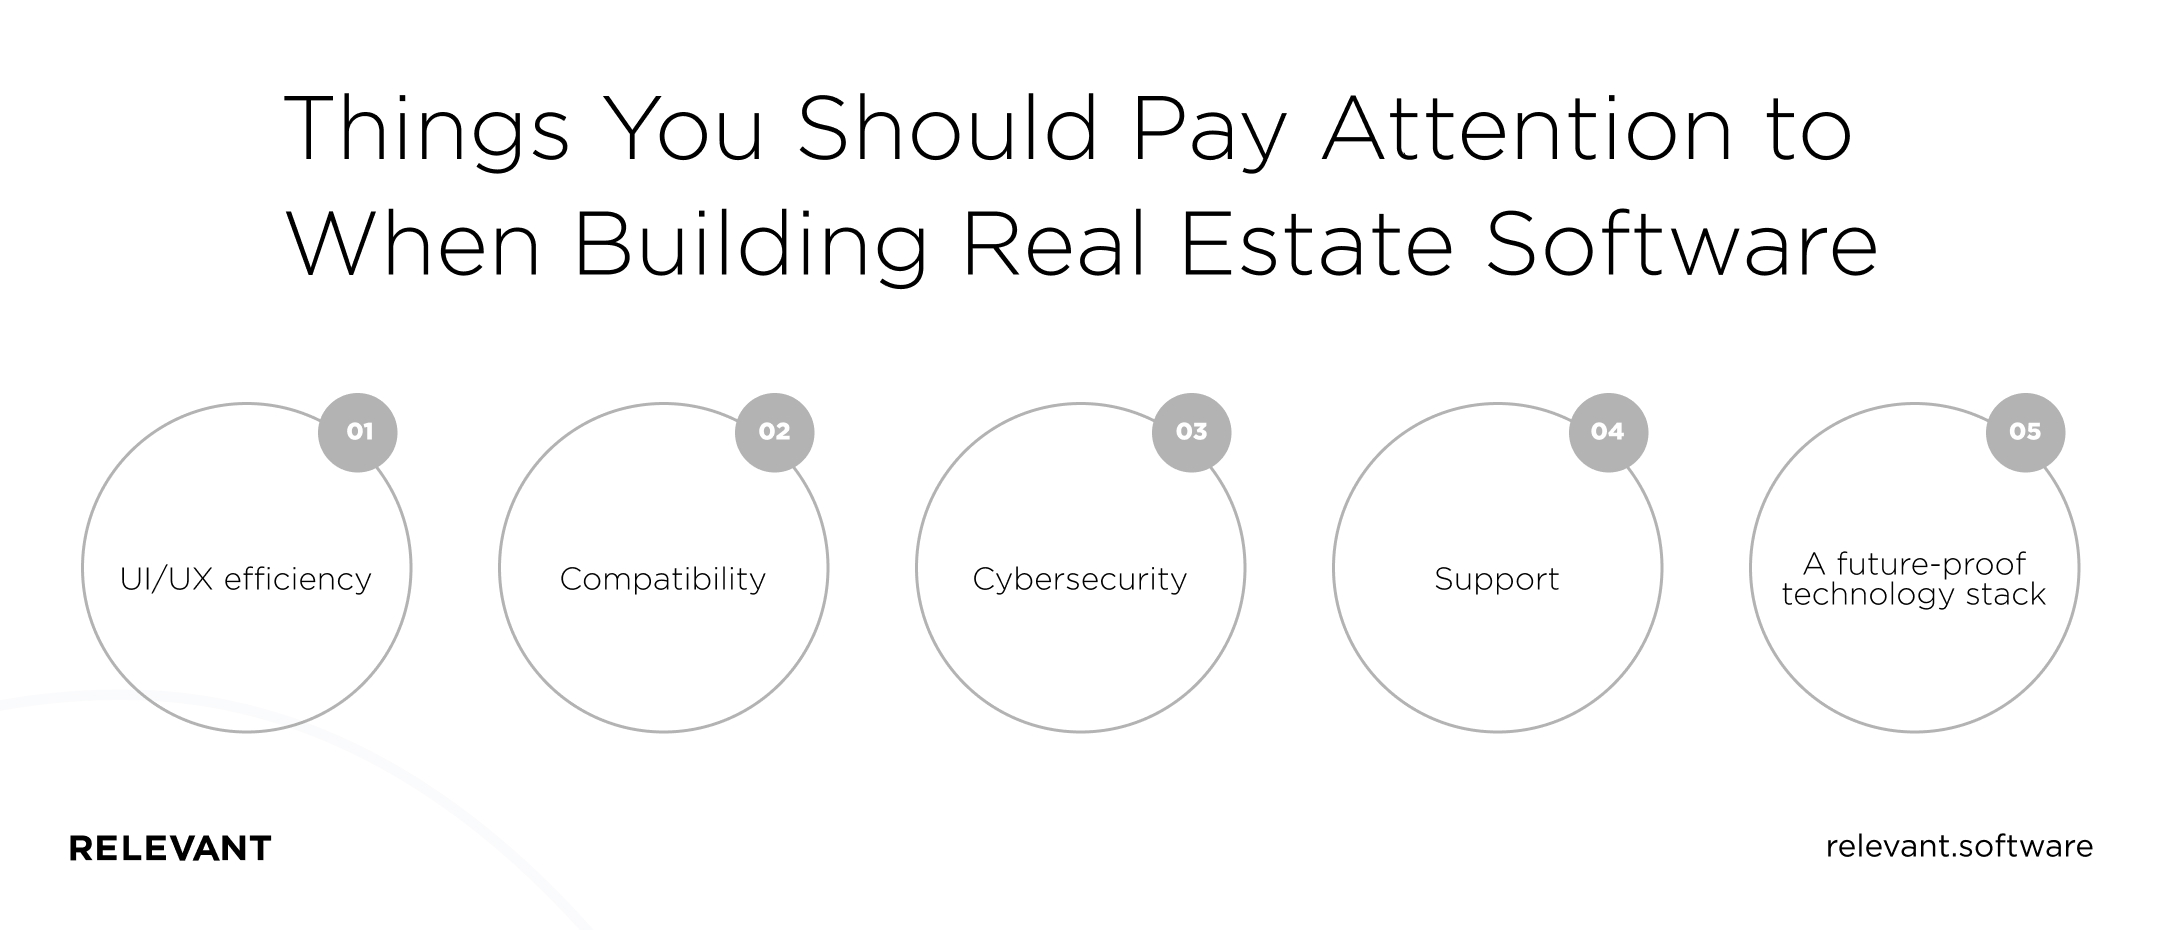 Things You Should Pay Attention to When Building Real Estate Software